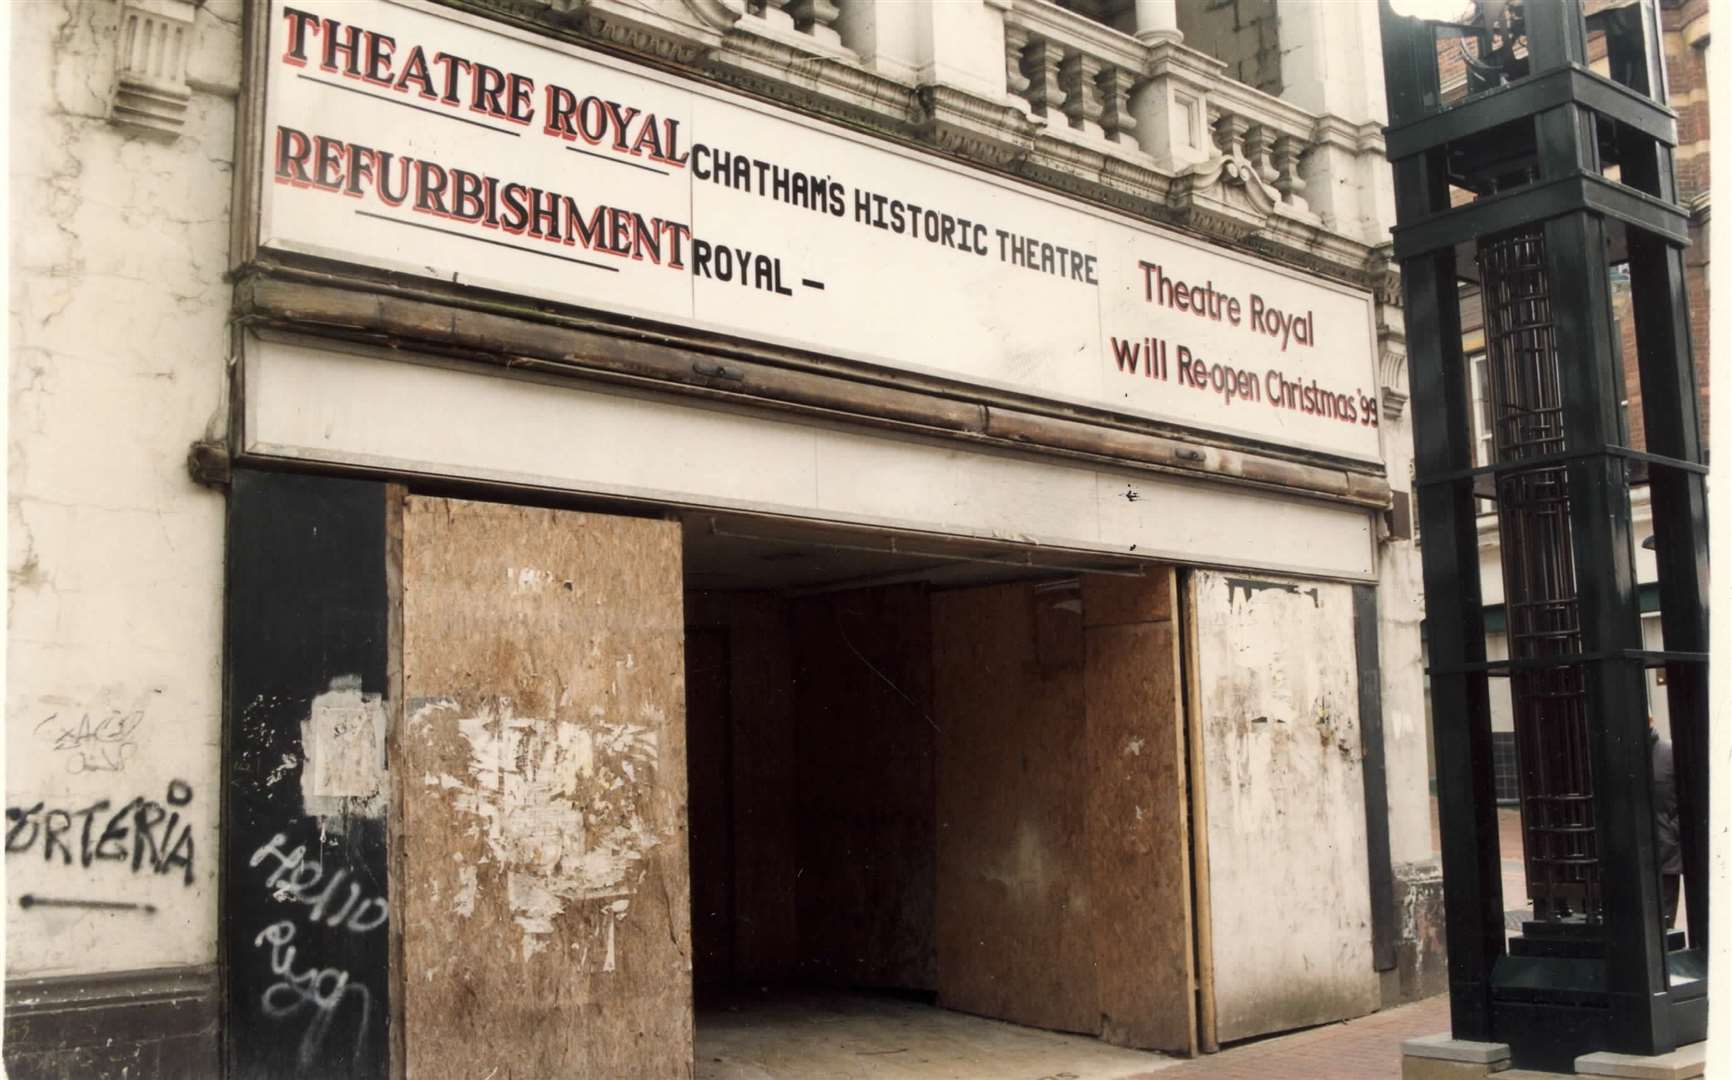 By February 1992, the theatre had fallen into significant disrepair